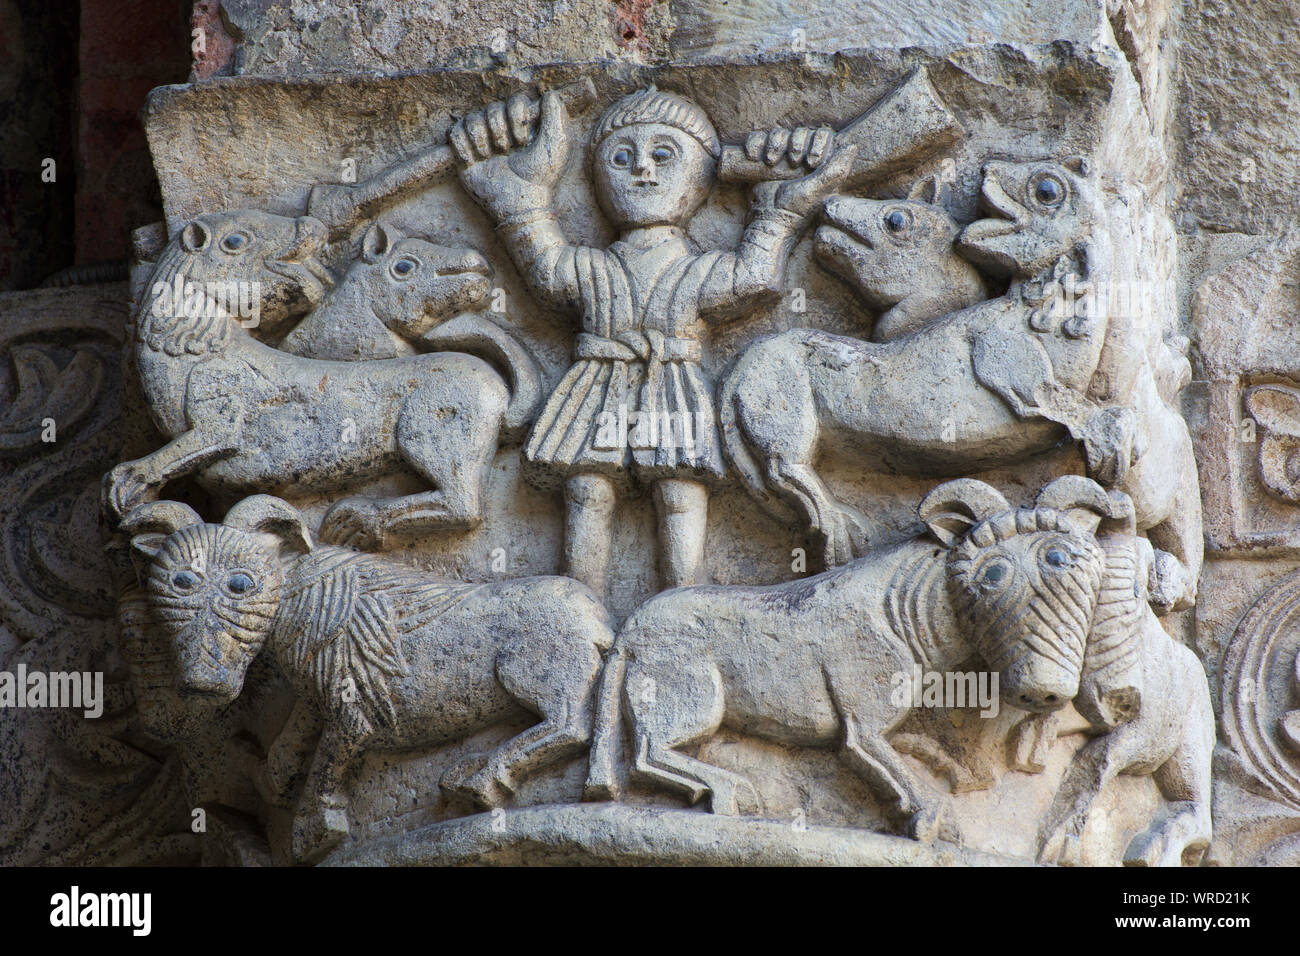 A man (Orpheus?) taming wild beasts with music and his chant - Romanesque-style capital - Atrium of Ansperto - Basilica of Sant'Ambrogio - Milan Stock Photo